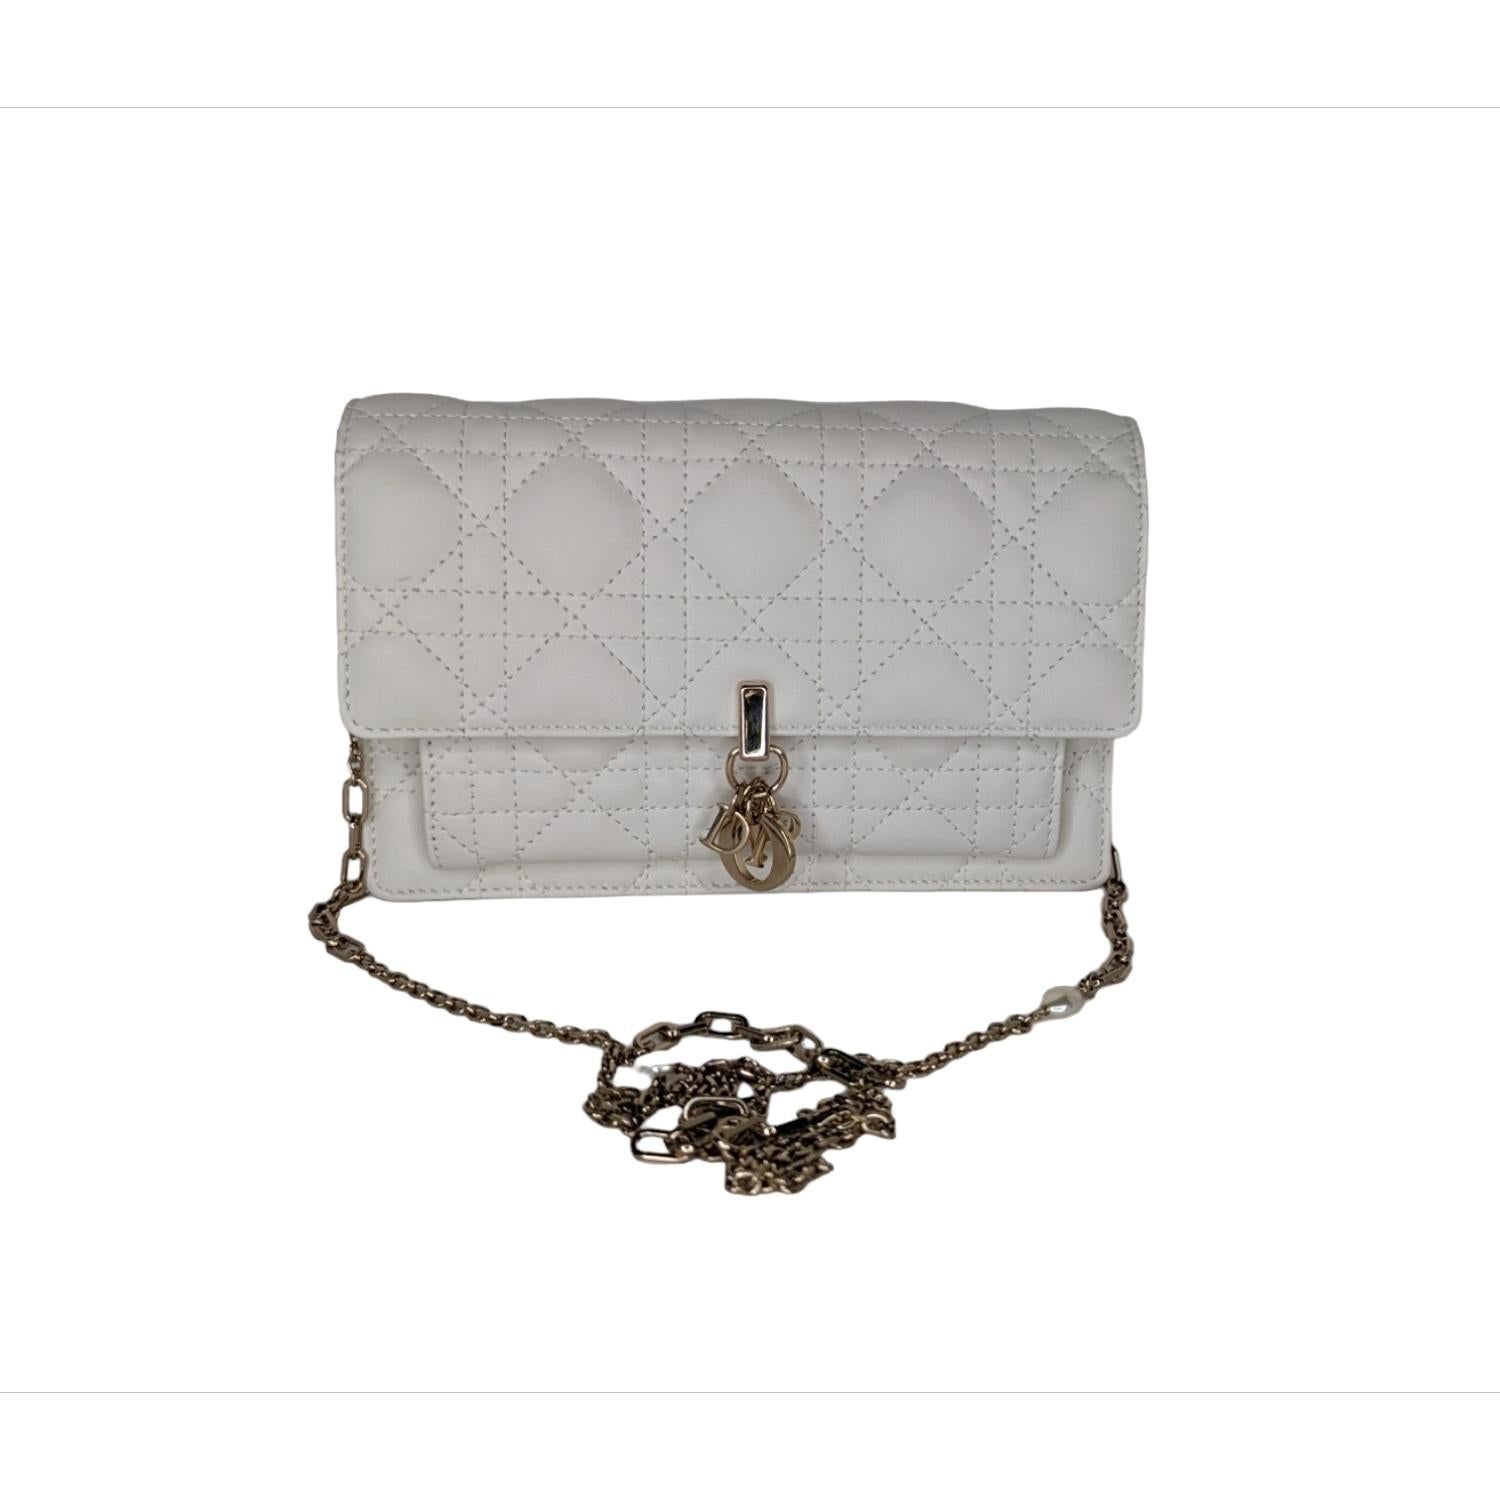 The Lady Dior pouch is a compact yet spacious companion. Crafted in latte lambskin with Cannage stitching, it is embellished with a 'D.I.O.R.' charm for a chic and timeless allure. Thanks to its numerous compartments, the functional accessory can